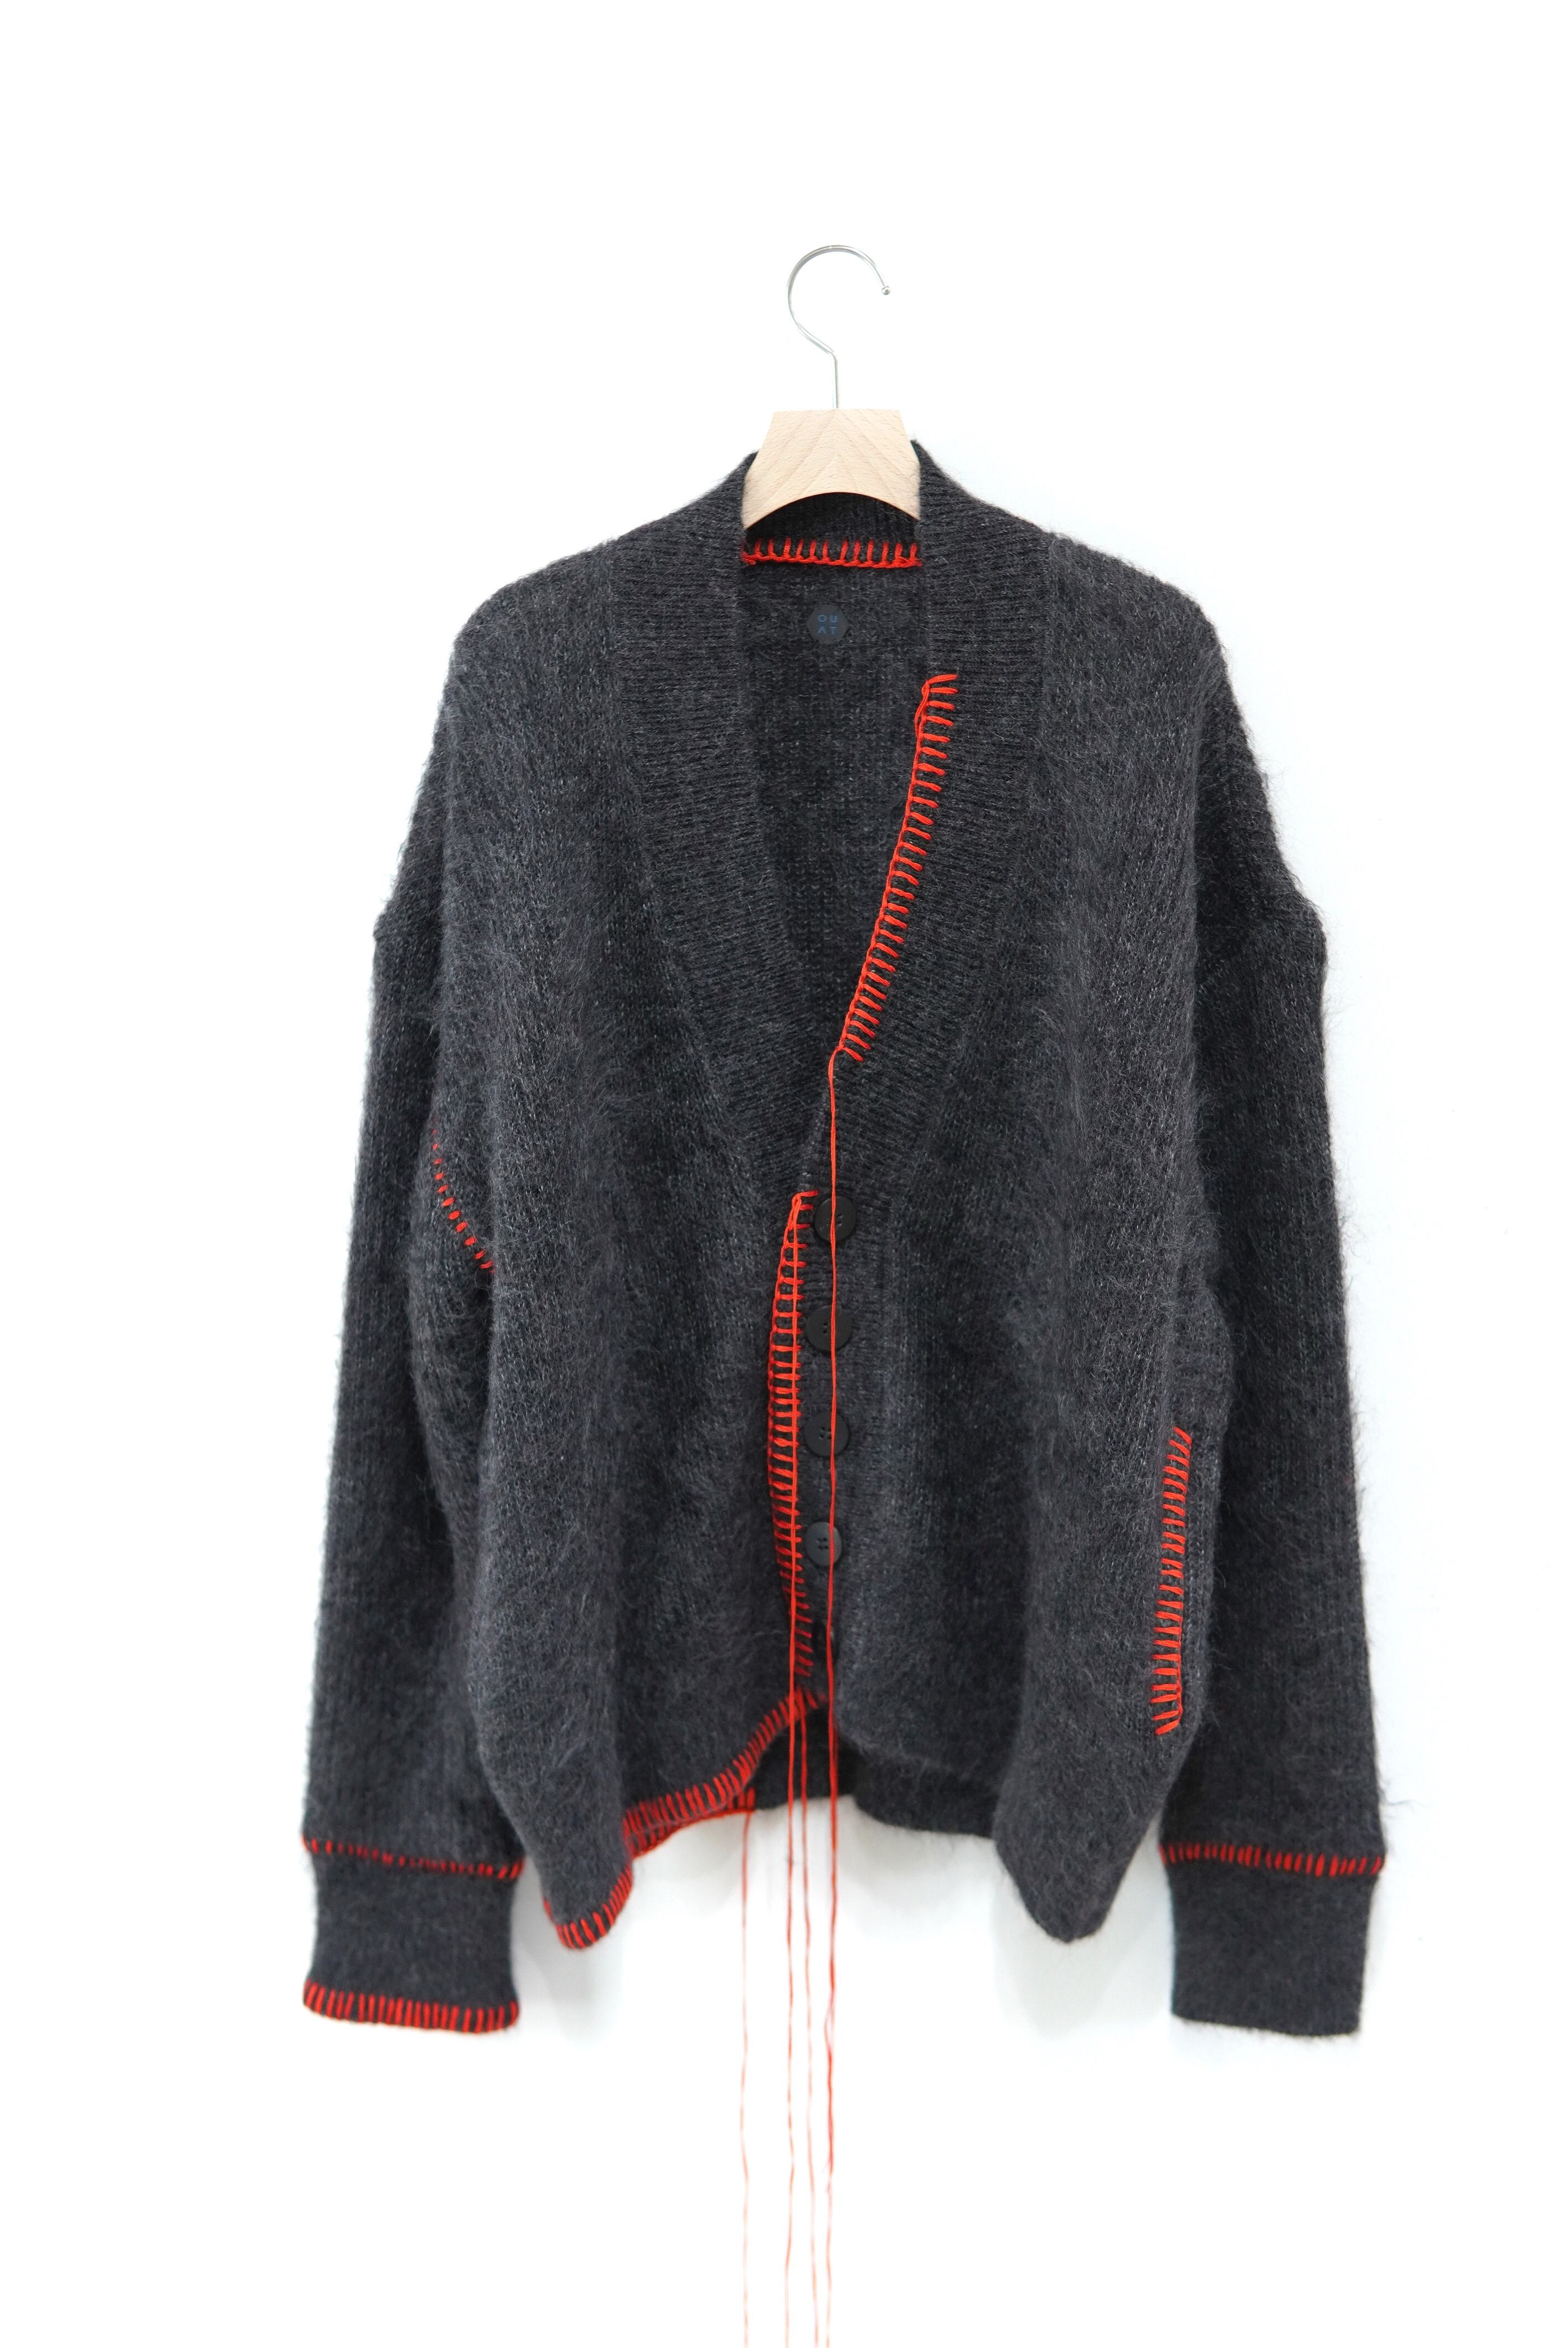 OUAT / MOHAIR OFFICE CARDIGAN / CHACOAL